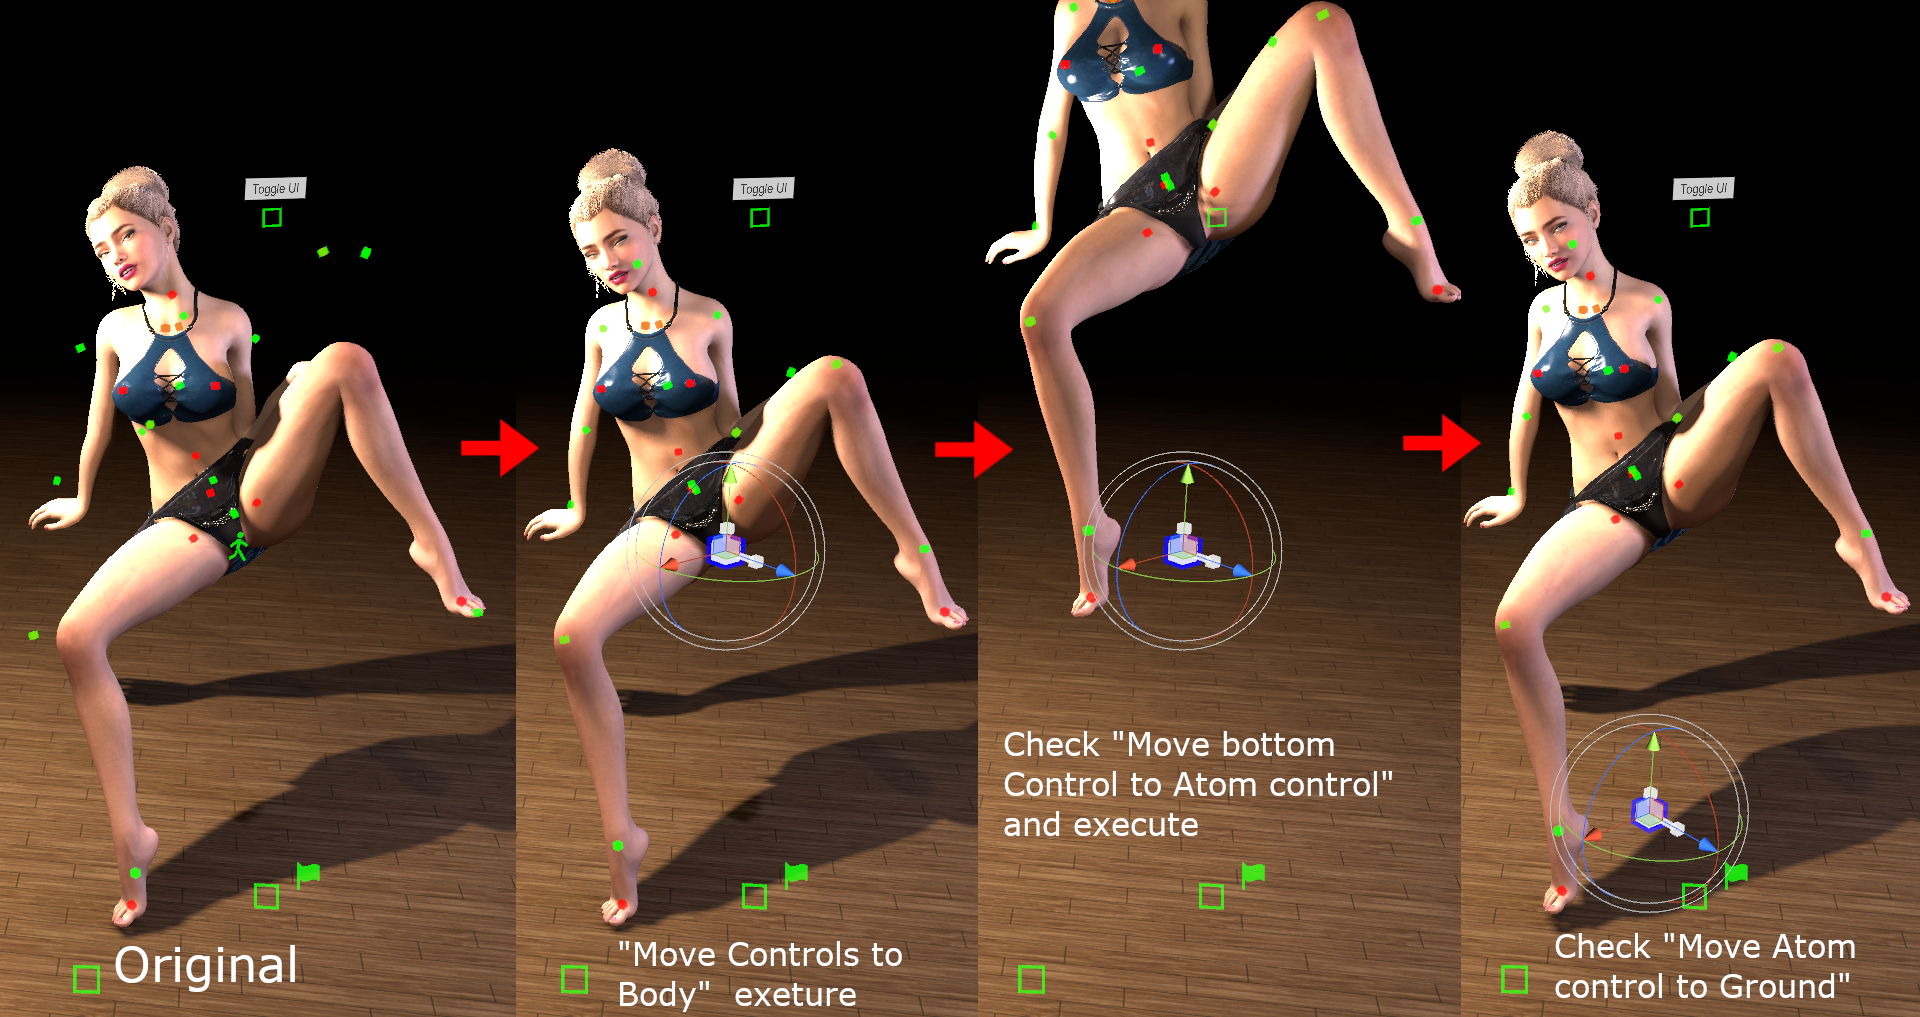 MoveControlsToBody 20220117 sample3.png